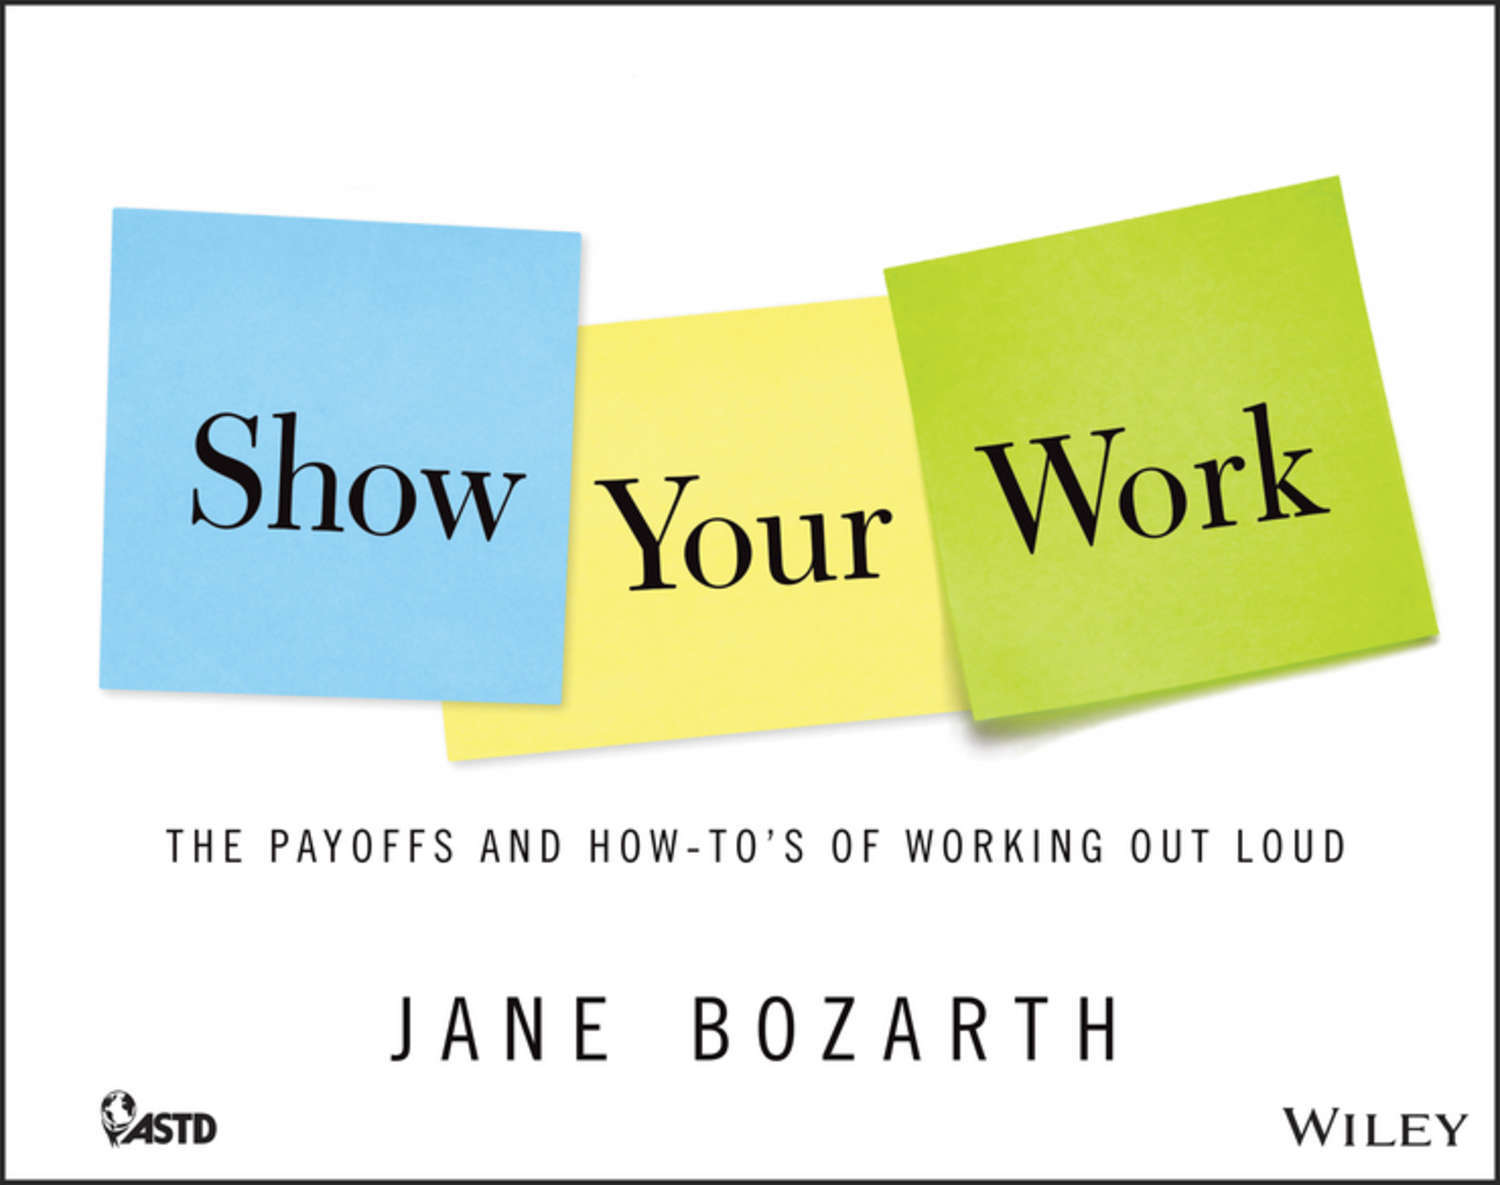 Show your work. Show your work book. Payoff. Show me your book.